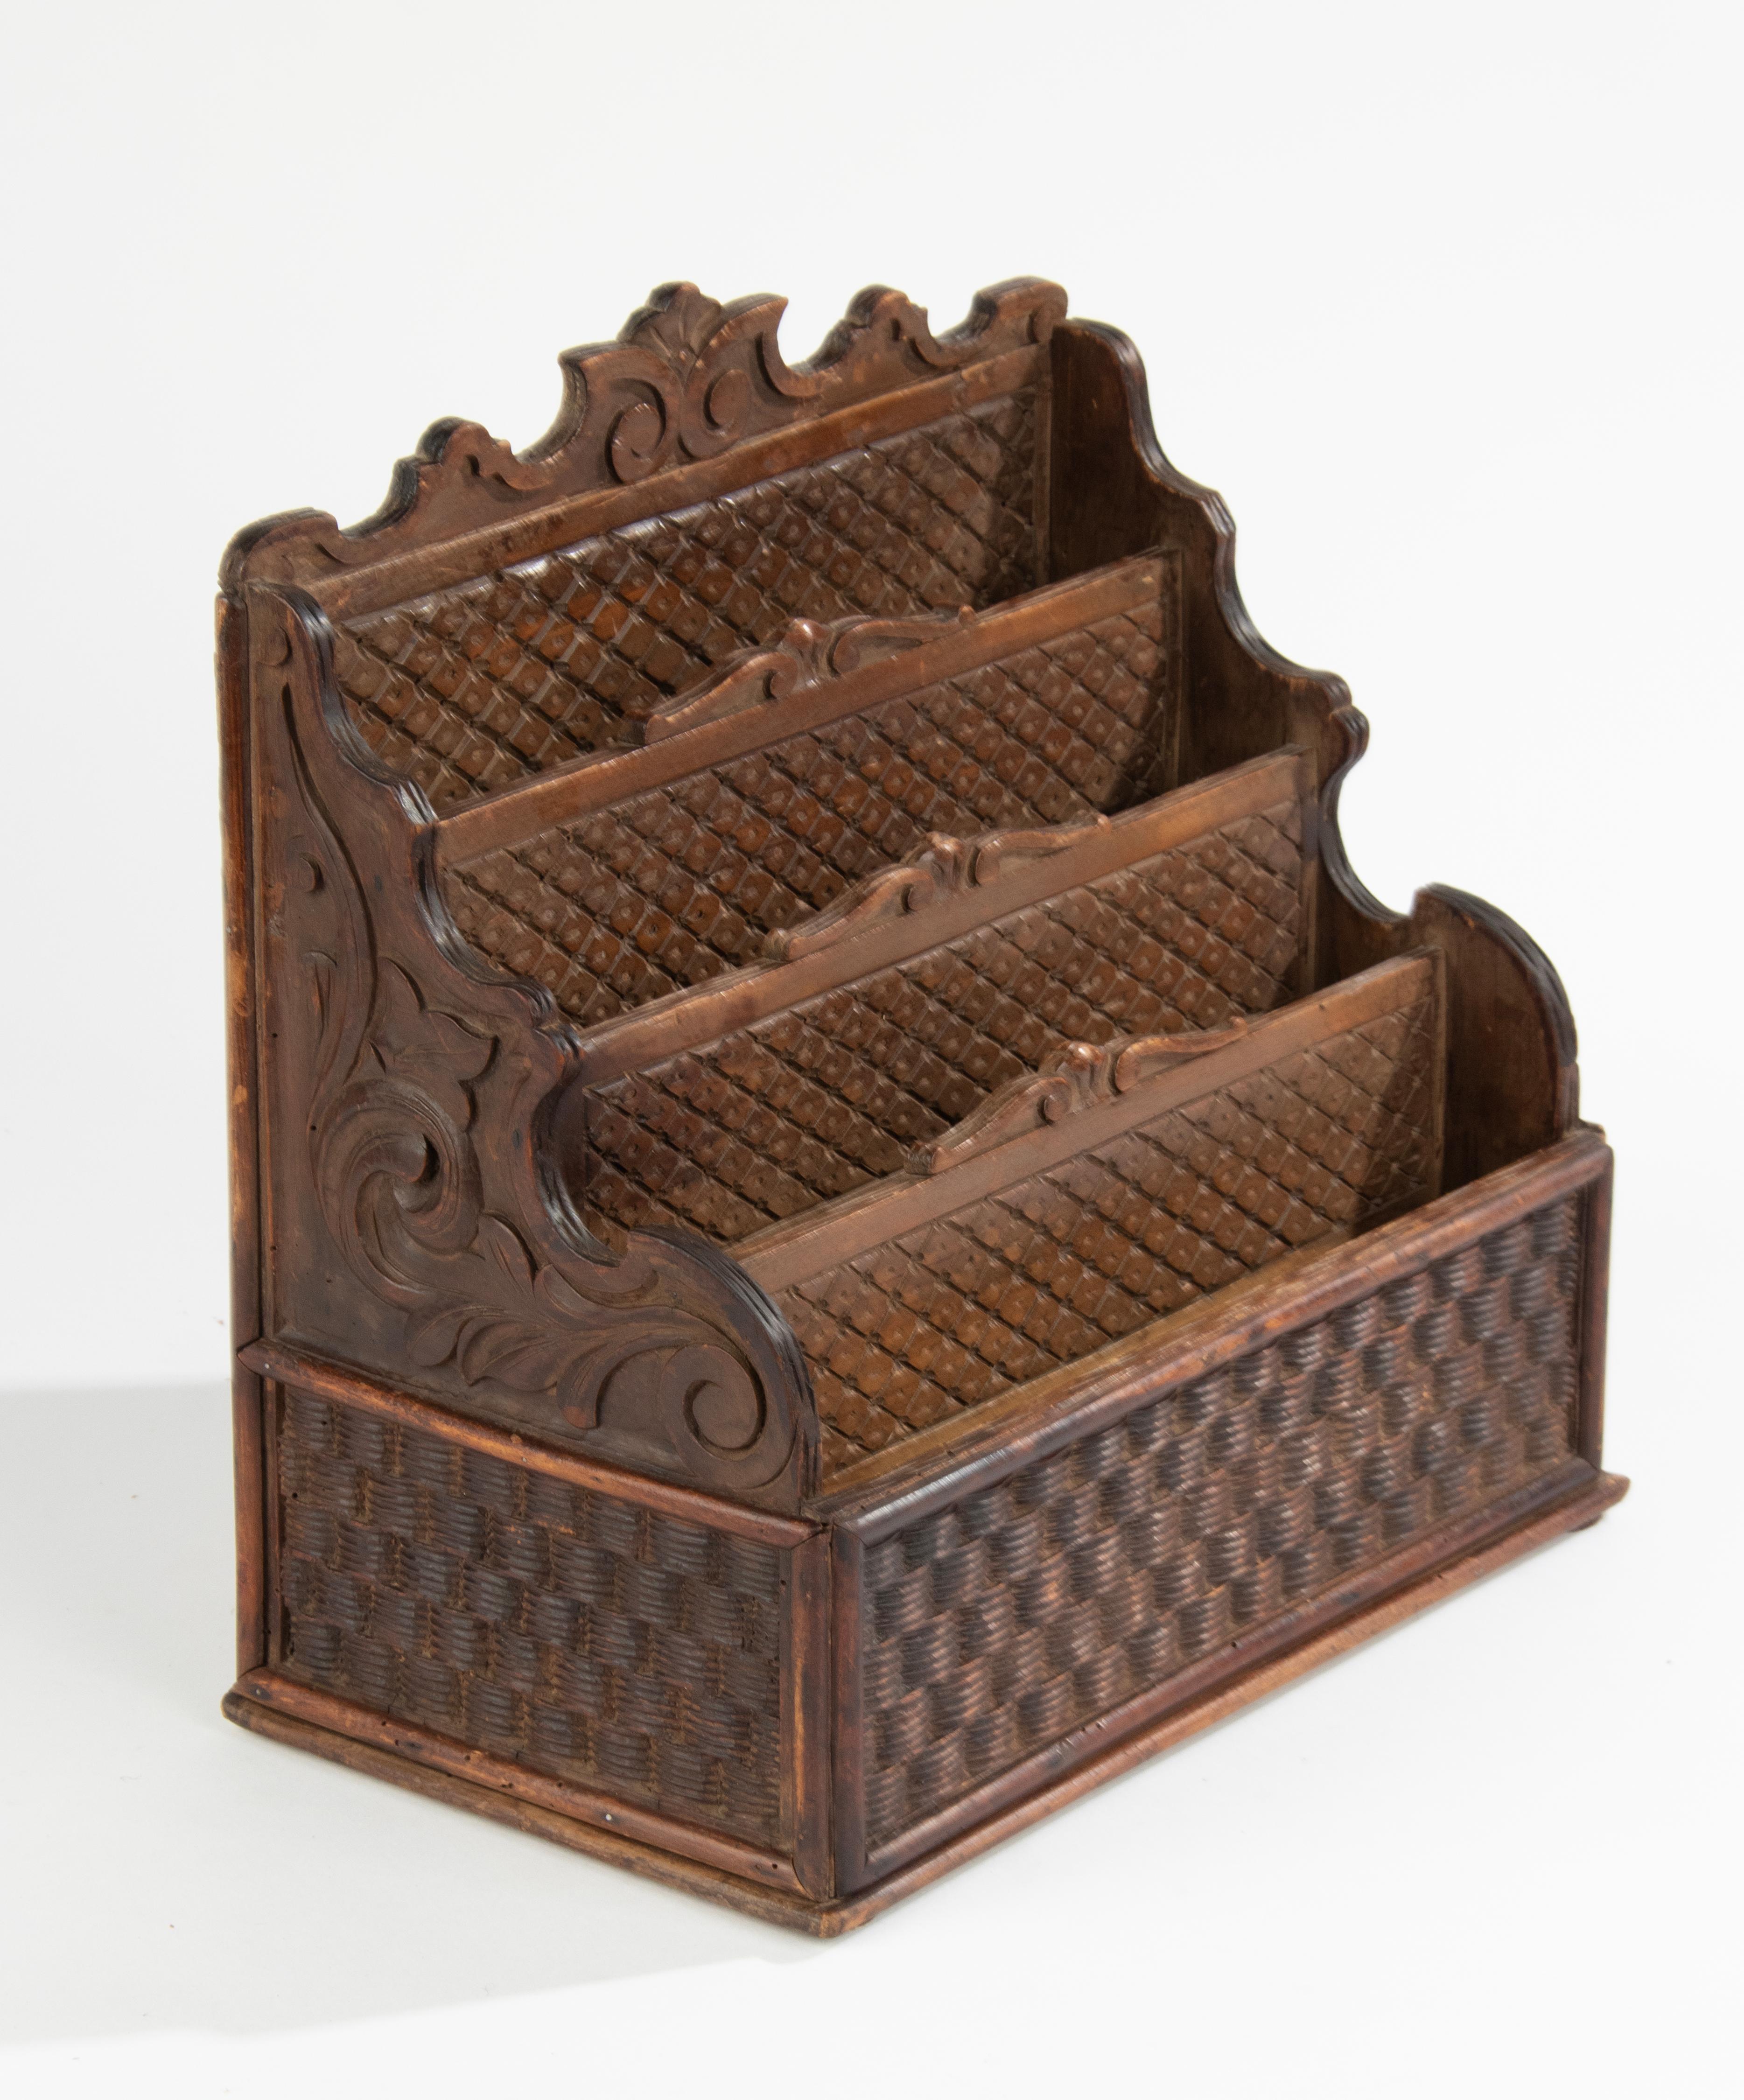 A large antique letter rack, made of carved wood. The wickerwork is also made of carved wood. With three compartments. Made in France around 1890-1900.
Dimensions: 35 (h) x 36 (w) x 21 (d) cm.